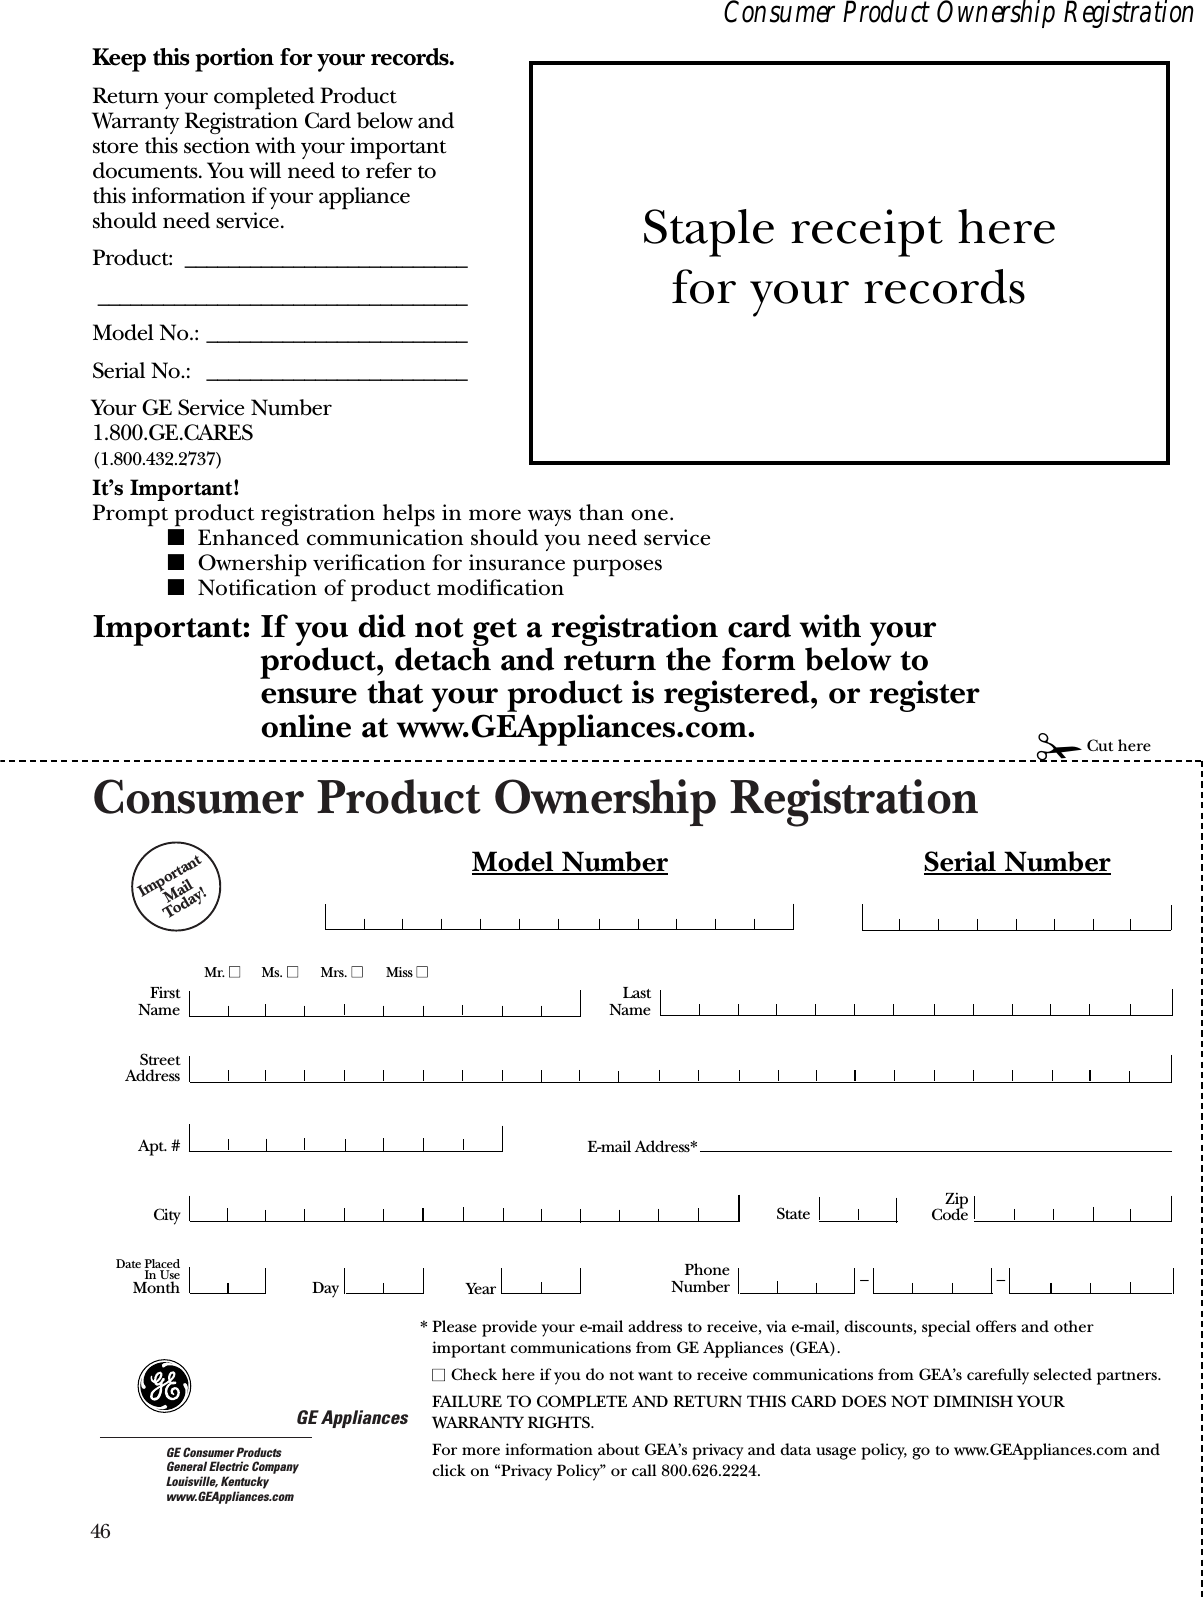 46Consumer Product Ownership RegistrationImportantMail Today!GE AppliancesGE Consumer ProductsGeneral Electric CompanyLouisville, Kentuckywww.GEAppliances.comFirstNameMr. ■■Ms. ■■Mrs. ■■Miss ■■StreetAddressCity StateDate PlacedIn UseMonth Day YearZipCodeApt. #LastNamePhoneNumber __Consumer Product Ownership RegistrationImportant: If you did not get a registration card with your product, detach and return the form below to ensure that your product is registered, or registeronline at www.GEAppliances.com. ✁Cut hereModel Number Serial NumberE-mail Address*Keep this portion for your records.Return your completed ProductWarranty Registration Card below andstore this section with your importantdocuments. You will need to refer tothis information if your applianceshould need service.Product: ____________________________________________________________Model No.: ________________________Serial No.: ________________________Your GE Service Number1.800.GE.CARES(1.800.432.2737)It’s Important!Prompt product registration helps in more ways than one.■Enhanced communication should you need service■Ownership verification for insurance purposes■Notification of product modificationStaple receipt here for your records* Please provide your e-mail address to receive, via e-mail, discounts, special offers and otherimportant communications from GE Appliances (GEA).■■ Check here if you do not want to receive communications from GEA’s carefully selected partners.FAILURE TO COMPLETE AND RETURN THIS CARD DOES NOT DIMINISH YOUR WARRANTY RIGHTS.For more information about GEA’s privacy and data usage policy, go to www.GEAppliances.com andclick on “Privacy Policy” or call 800.626.2224.